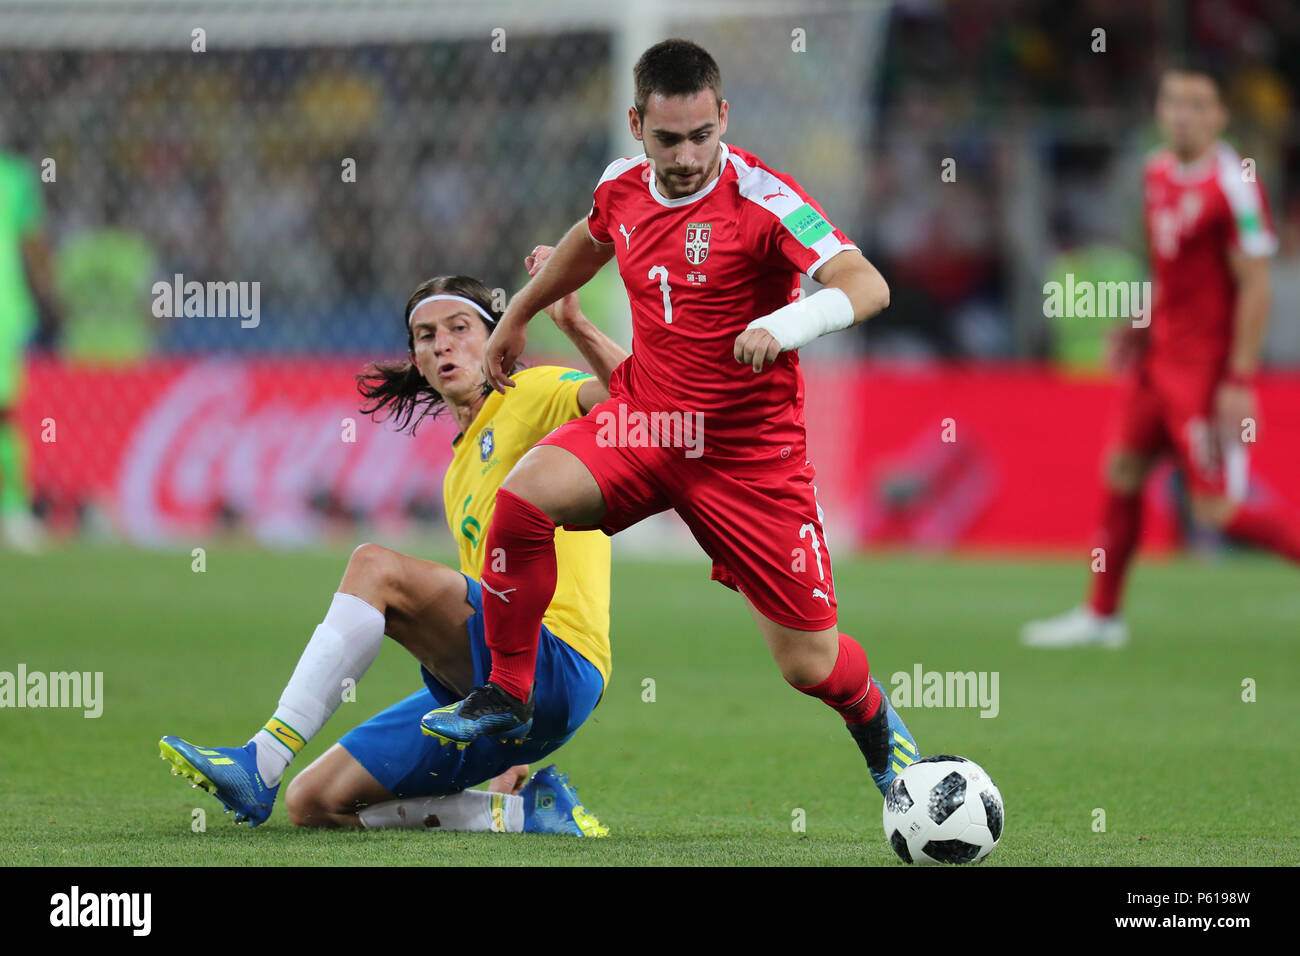 Filipe Luis & Andrija Zivkovic  SERBIA V BRAZIL  SERBIA V BRAZIL , 2018 FIFA WORLD CUP RUSSIA  27 June 2018  GBC8995  2018 FIFA World Cup Russia Spartak Stadium Moscow    STRICTLY EDITORIAL USE ONLY.   If The Player/Players Depicted In This Image Is/Are Playing For An English Club Or The England National Team.   Then This Image May Only Be Used For Editorial Purposes. No Commercial Use.    The Following Usages Are Also Restricted EVEN IF IN AN EDITORIAL CONTEXT:   Use in conjuction with, or part of, any unauthorized audio, video, data, fixture lists, club/league logos, Betting, Games or any 'l Stock Photo